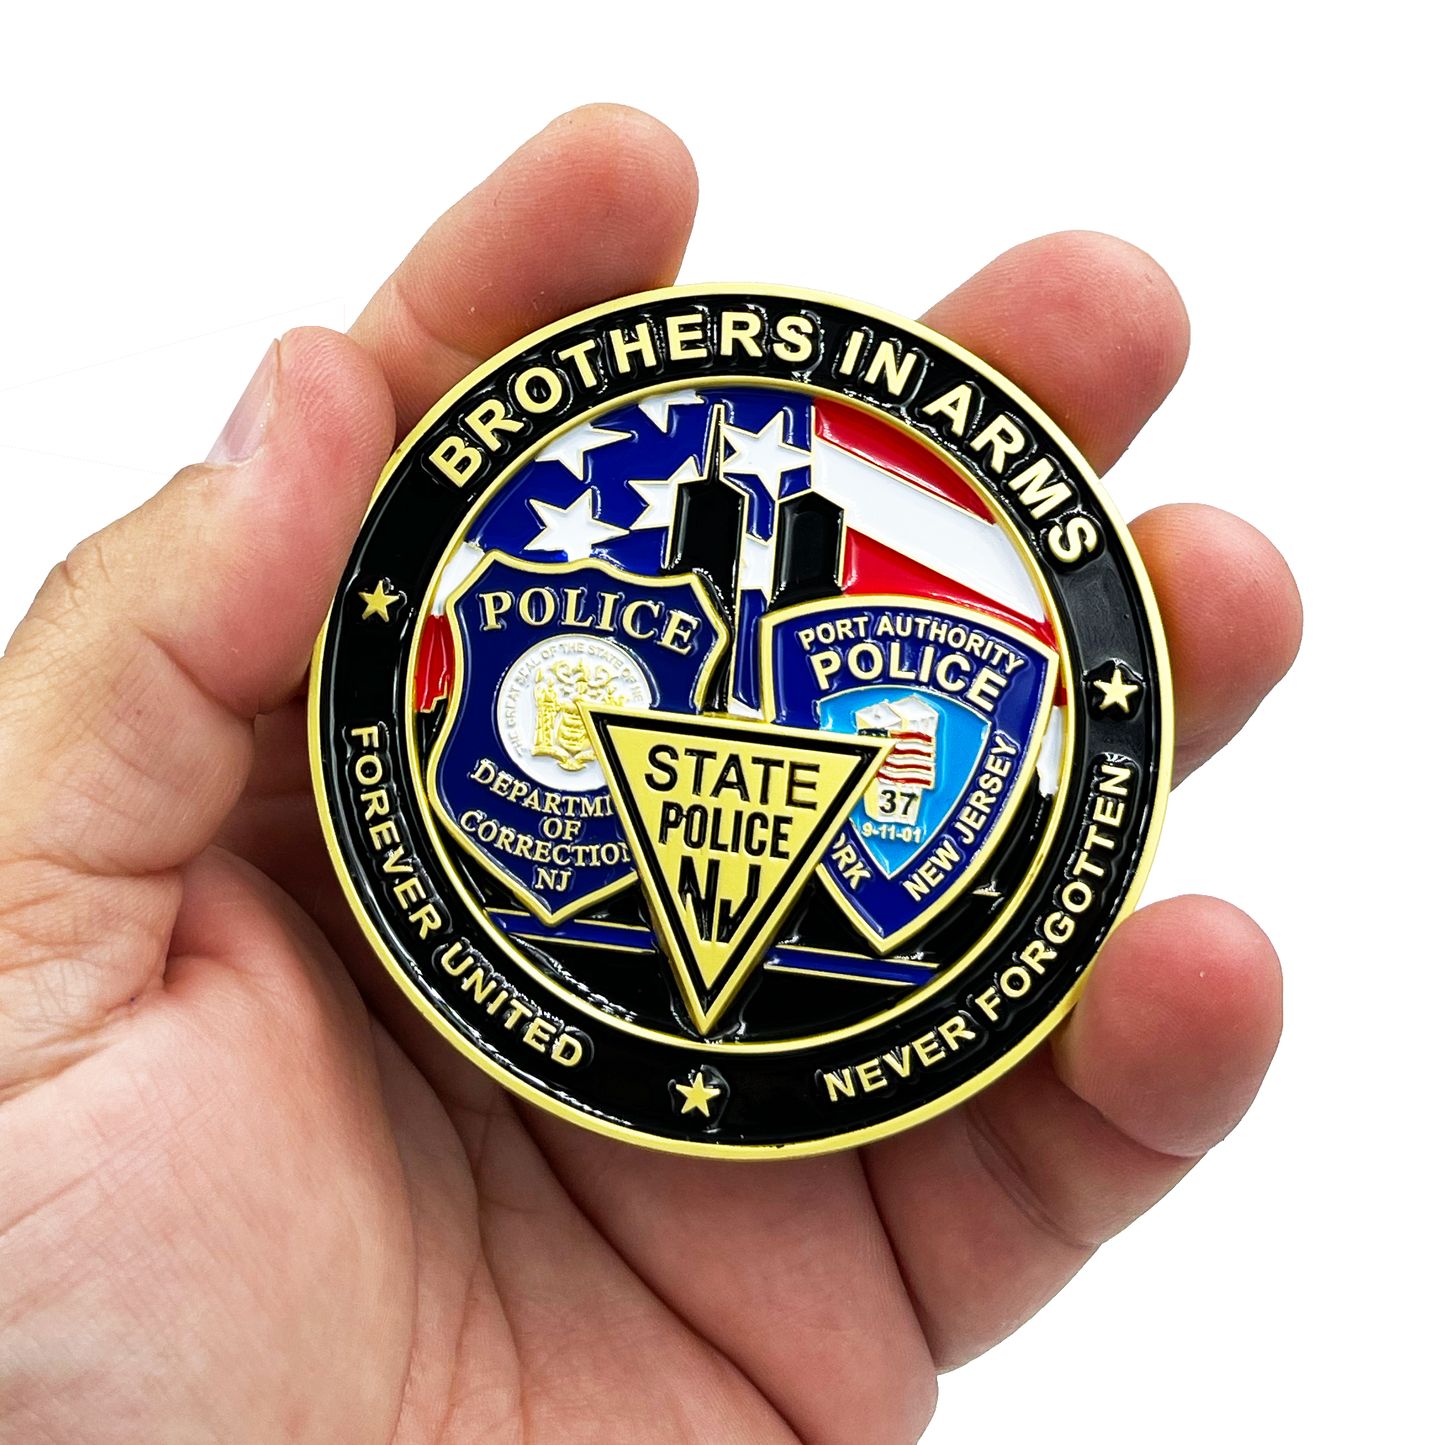 BL9-011 NY NJ Police State Trooper Corrections Port Authority 9/11 20th Anniversary Commemorative New Jersey Rose Challenge Coin